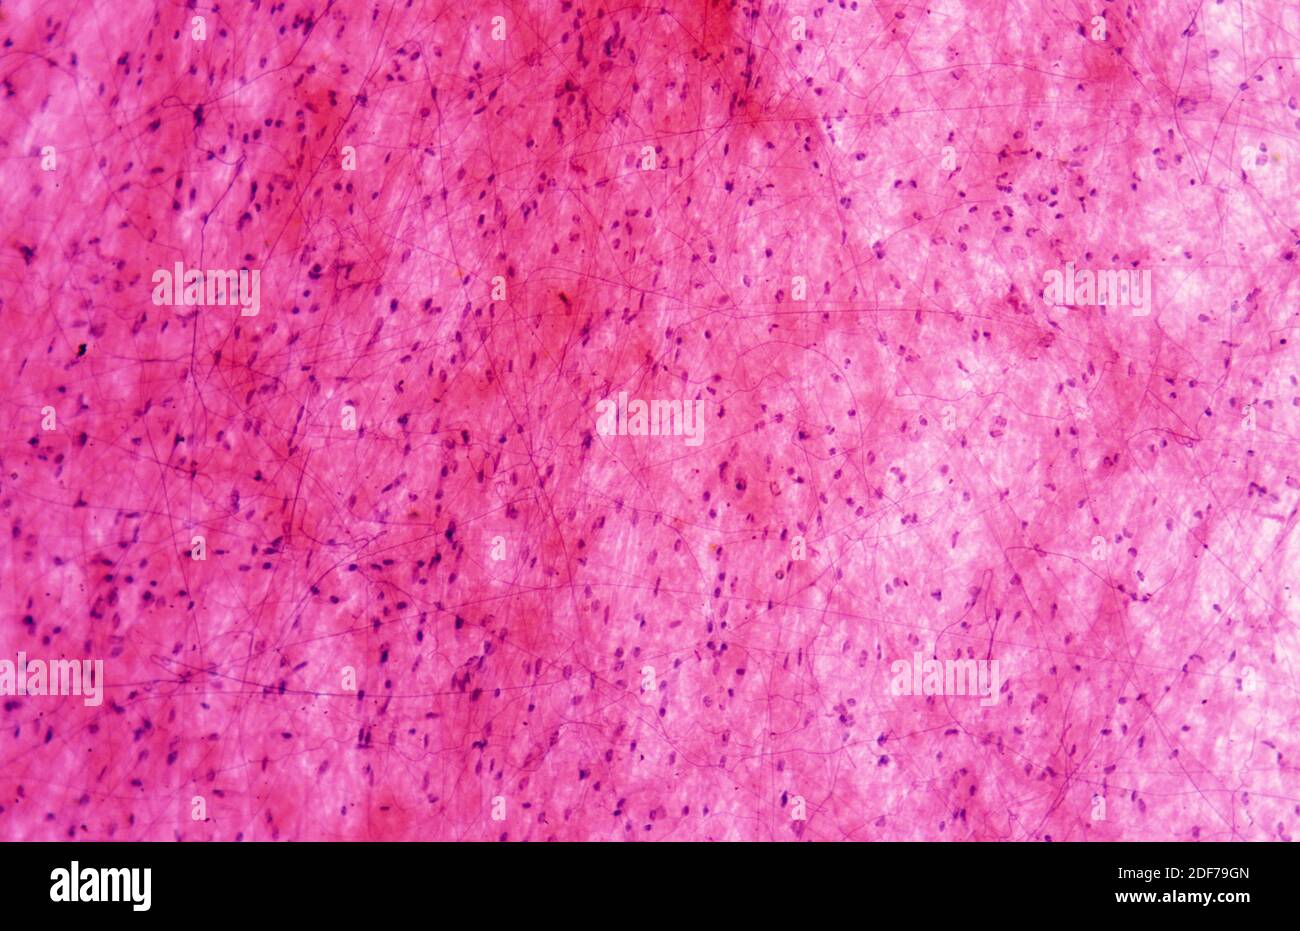 Loose connective tissue showing collagen fibers and fibroblasts. Photomicrograph. Stock Photo